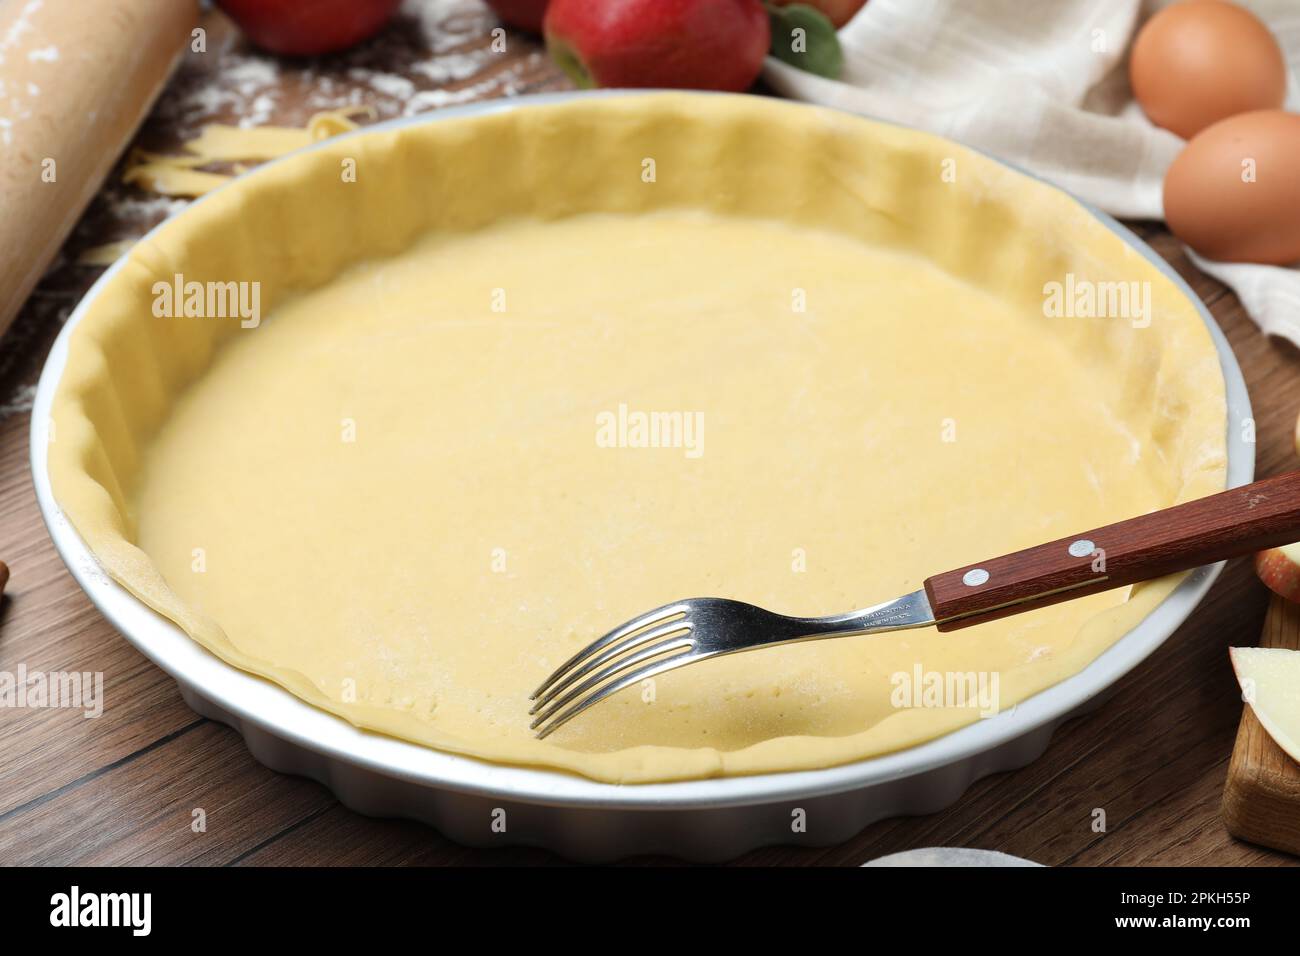 Raw dough with fork and ingredients on wooden table. Baking apple pie Stock Photo